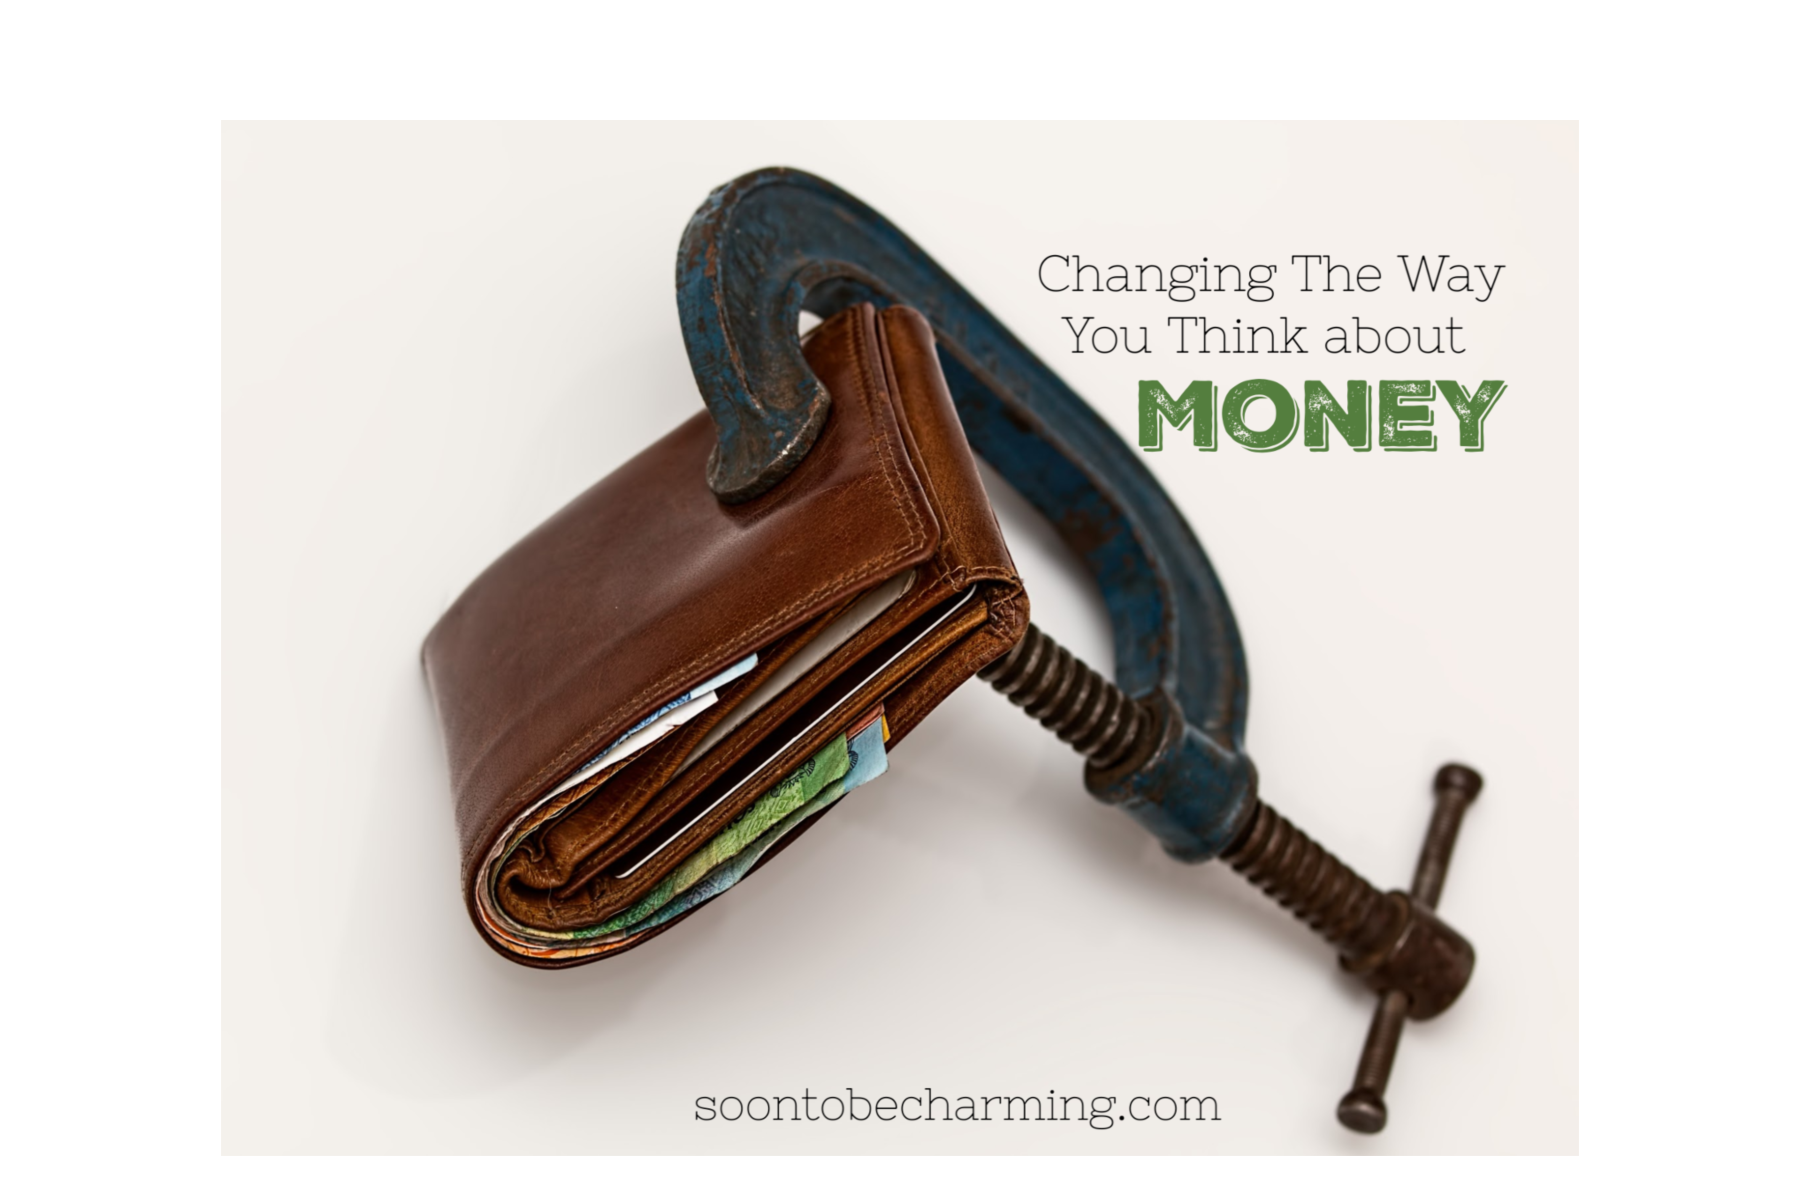 Changing The Way You Think About Money